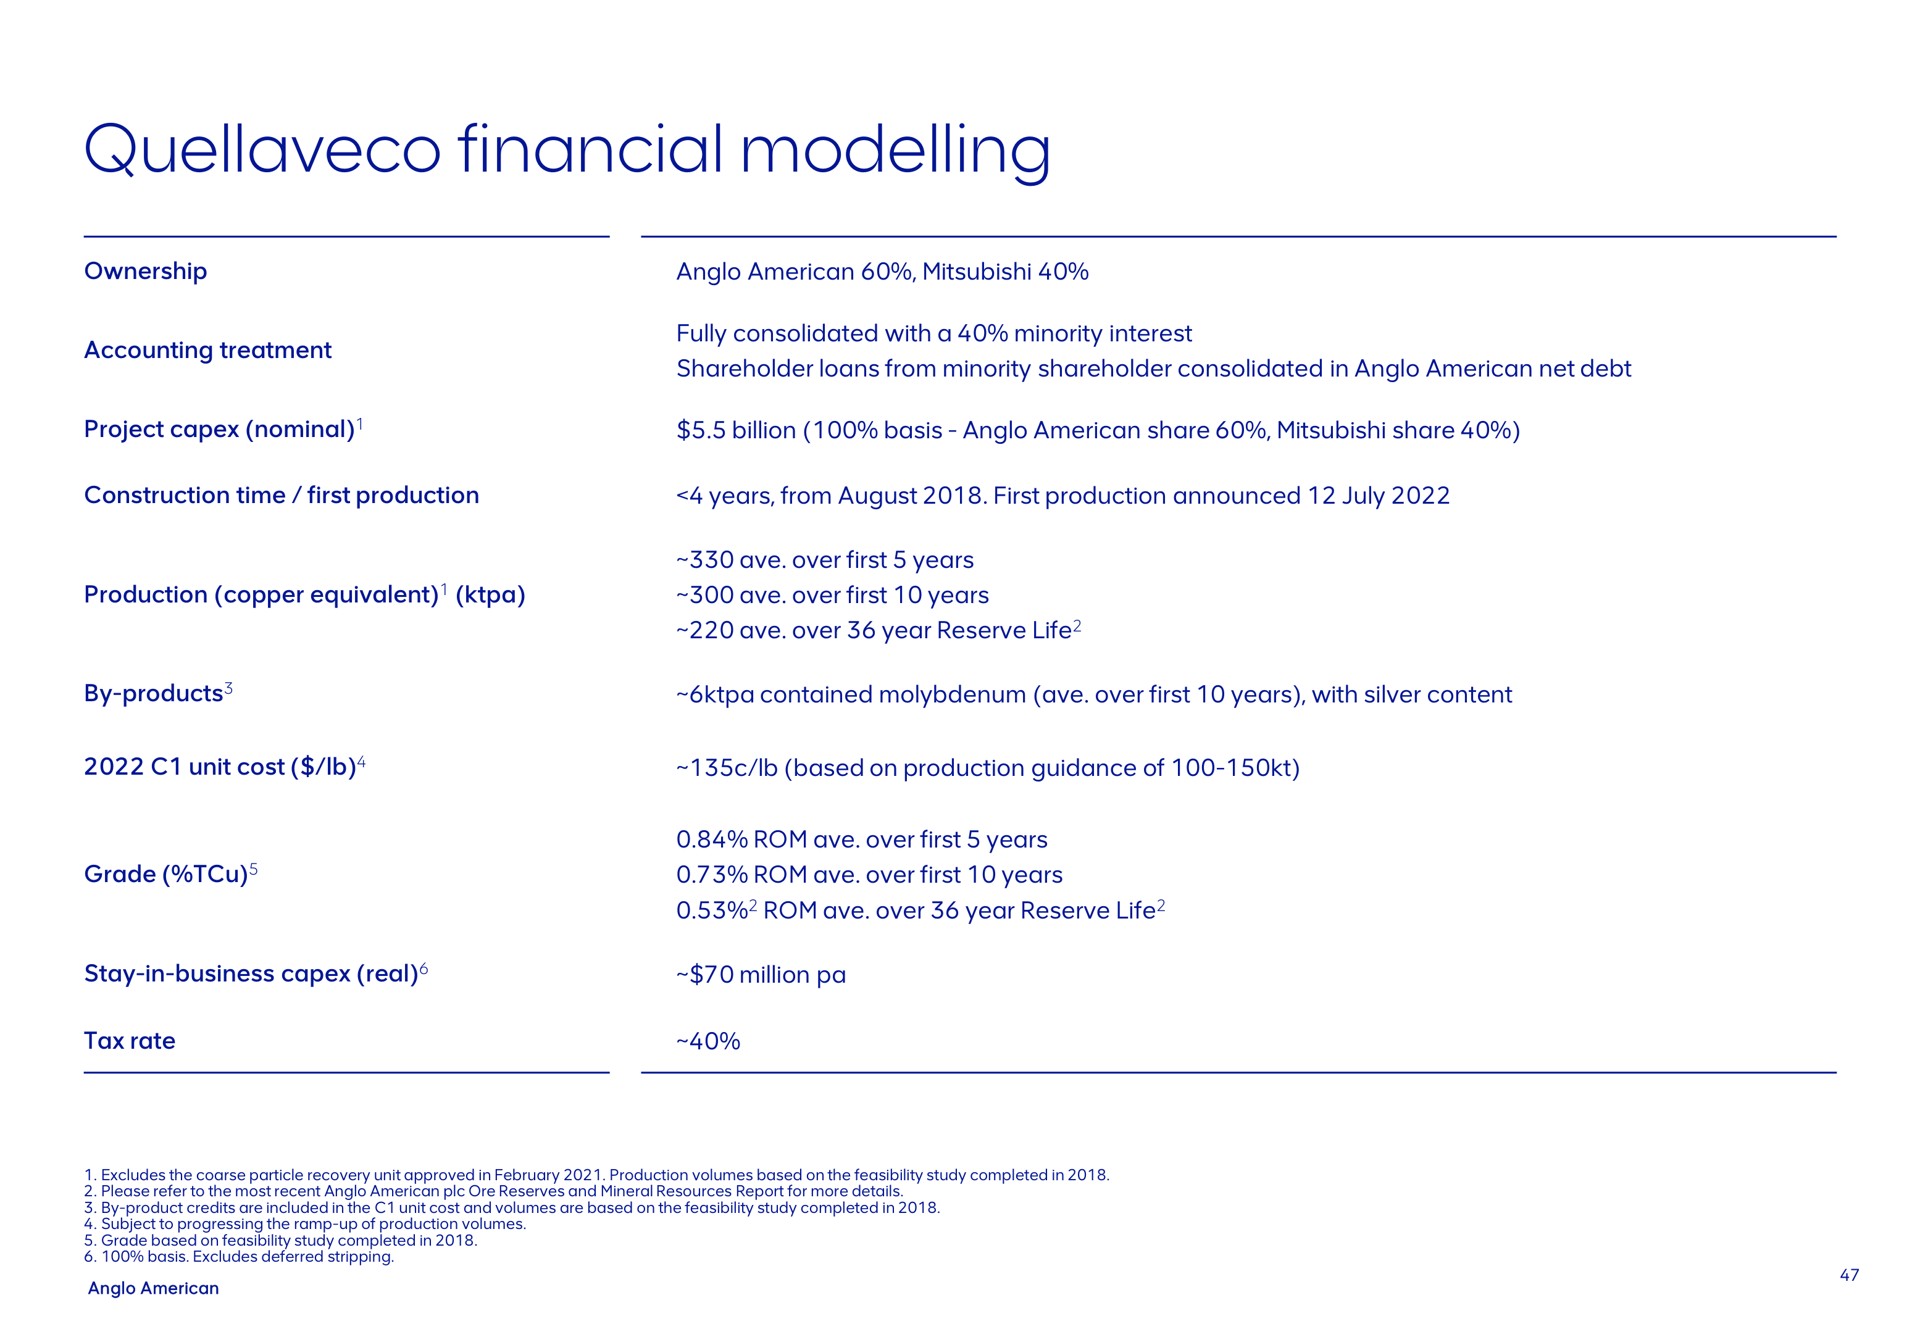 financial modelling ownership accounting treatment fully consolidated with a minority interest shareholder loans from minority shareholder consolidated in net debt project nominal billion basis share share construction time first production years from august first production announced production copper equivalent ave over first years ave over first years ave over year reserve life by products contained molybdenum ave over first years with silver content unit cost based on production guidance of grade ave over first years ave over first years ave over year reserve life stay in business real million tax rate excludes the coarse particle recovery unit approved in production volumes based on the feasibility study completed in please refer to the most recent ore reserves and mineral resources report for more details by product credits are included in the unit cost and volumes are based on the feasibility study completed in subject to progressing the ramp up of production volumes grade based on feasibility study completed in basis excludes deferred stripping | AngloAmerican